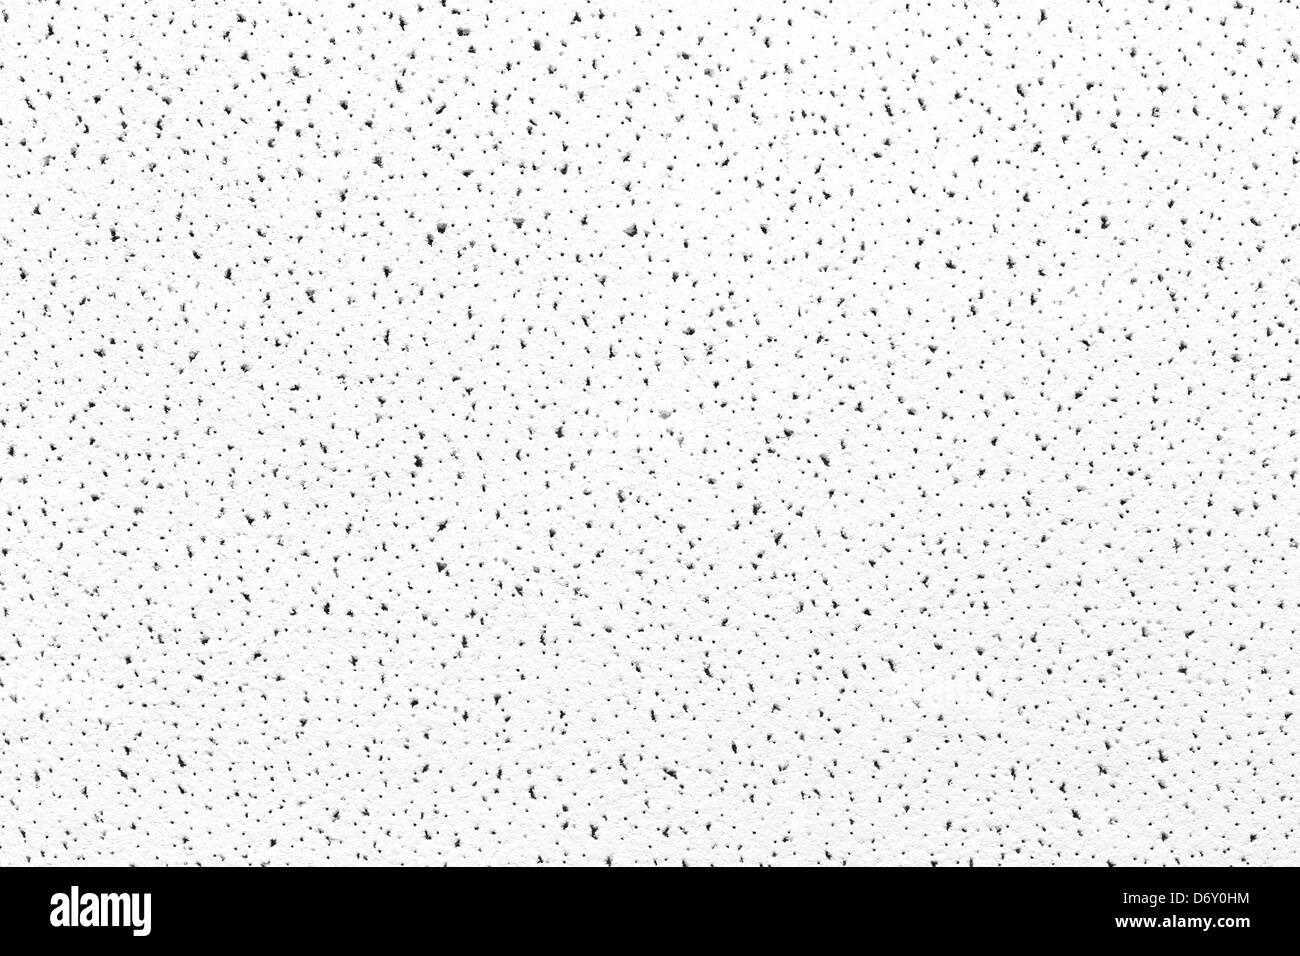 Close Up White Ceiling Tile Texture Stock Photo 55912240 Alamy